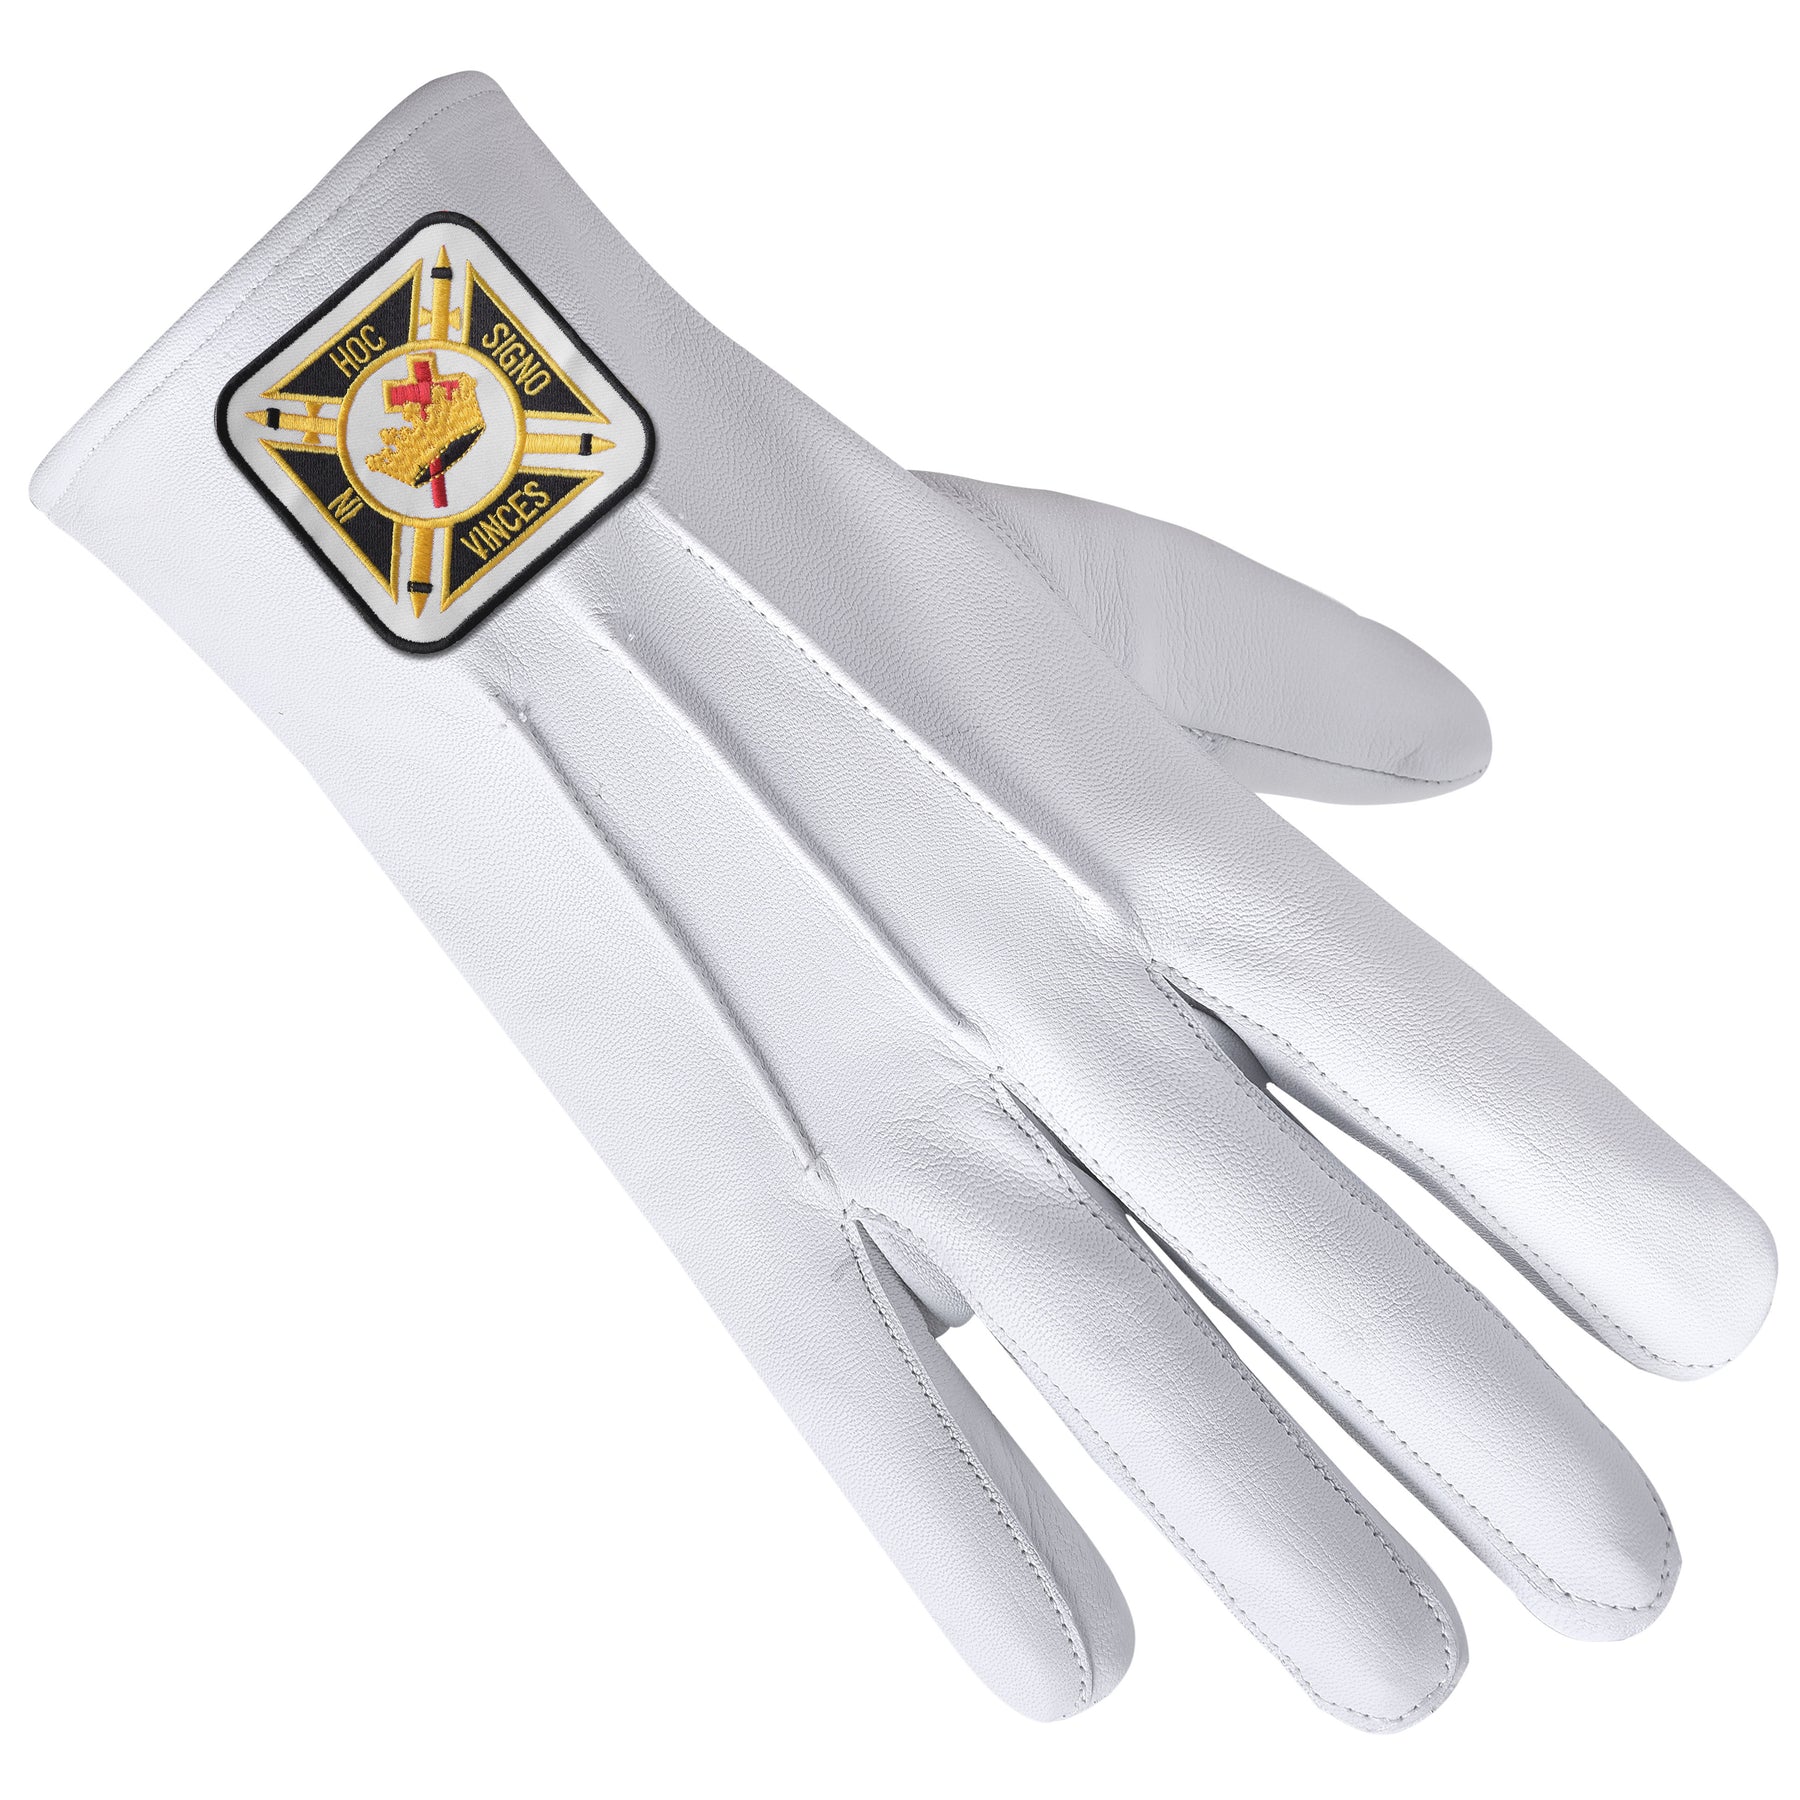 Knights Templar Commandery Glove - White Leather With Square Patch - Bricks Masons